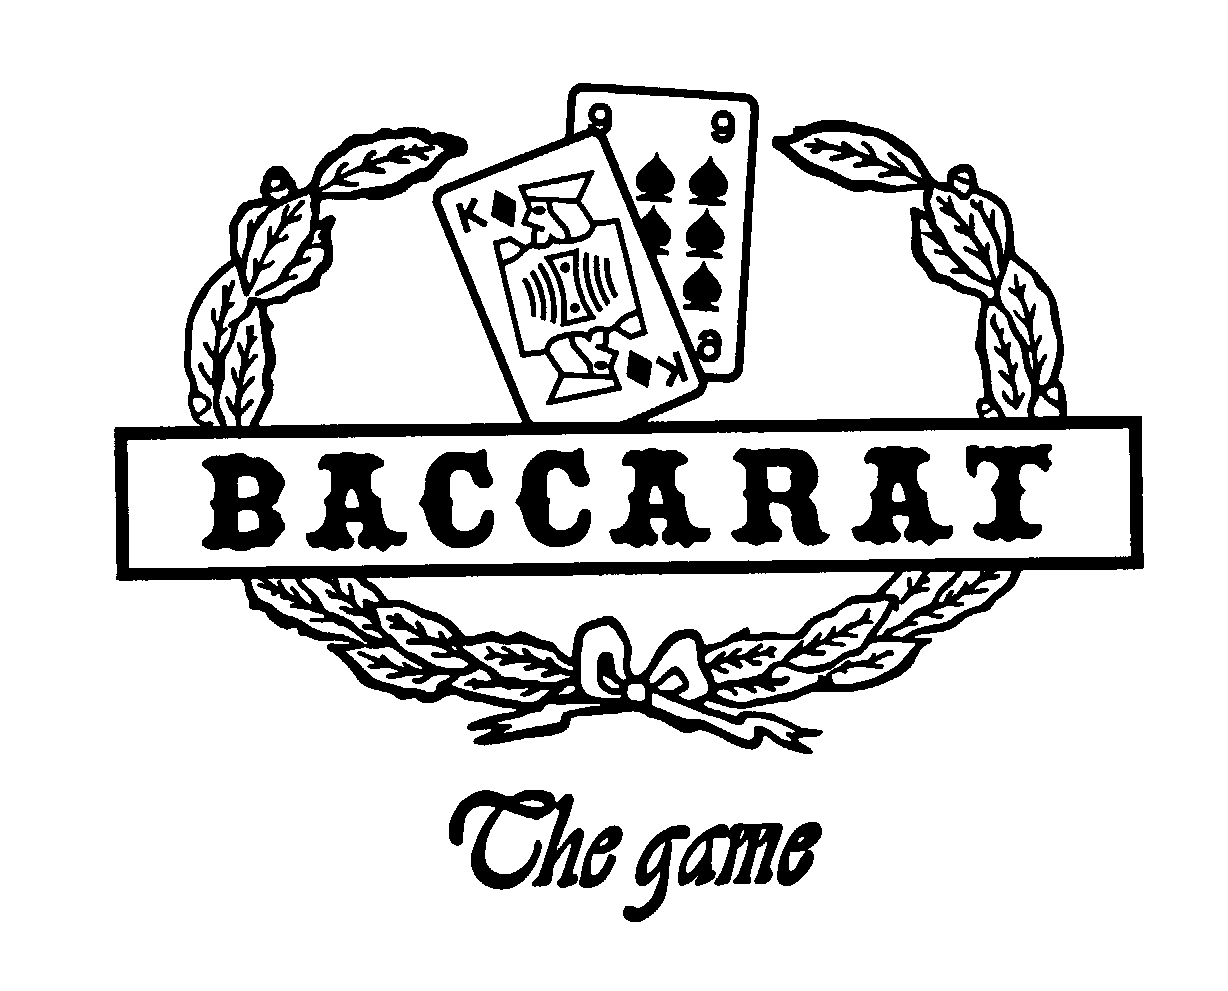  BACCARAT THE GAME